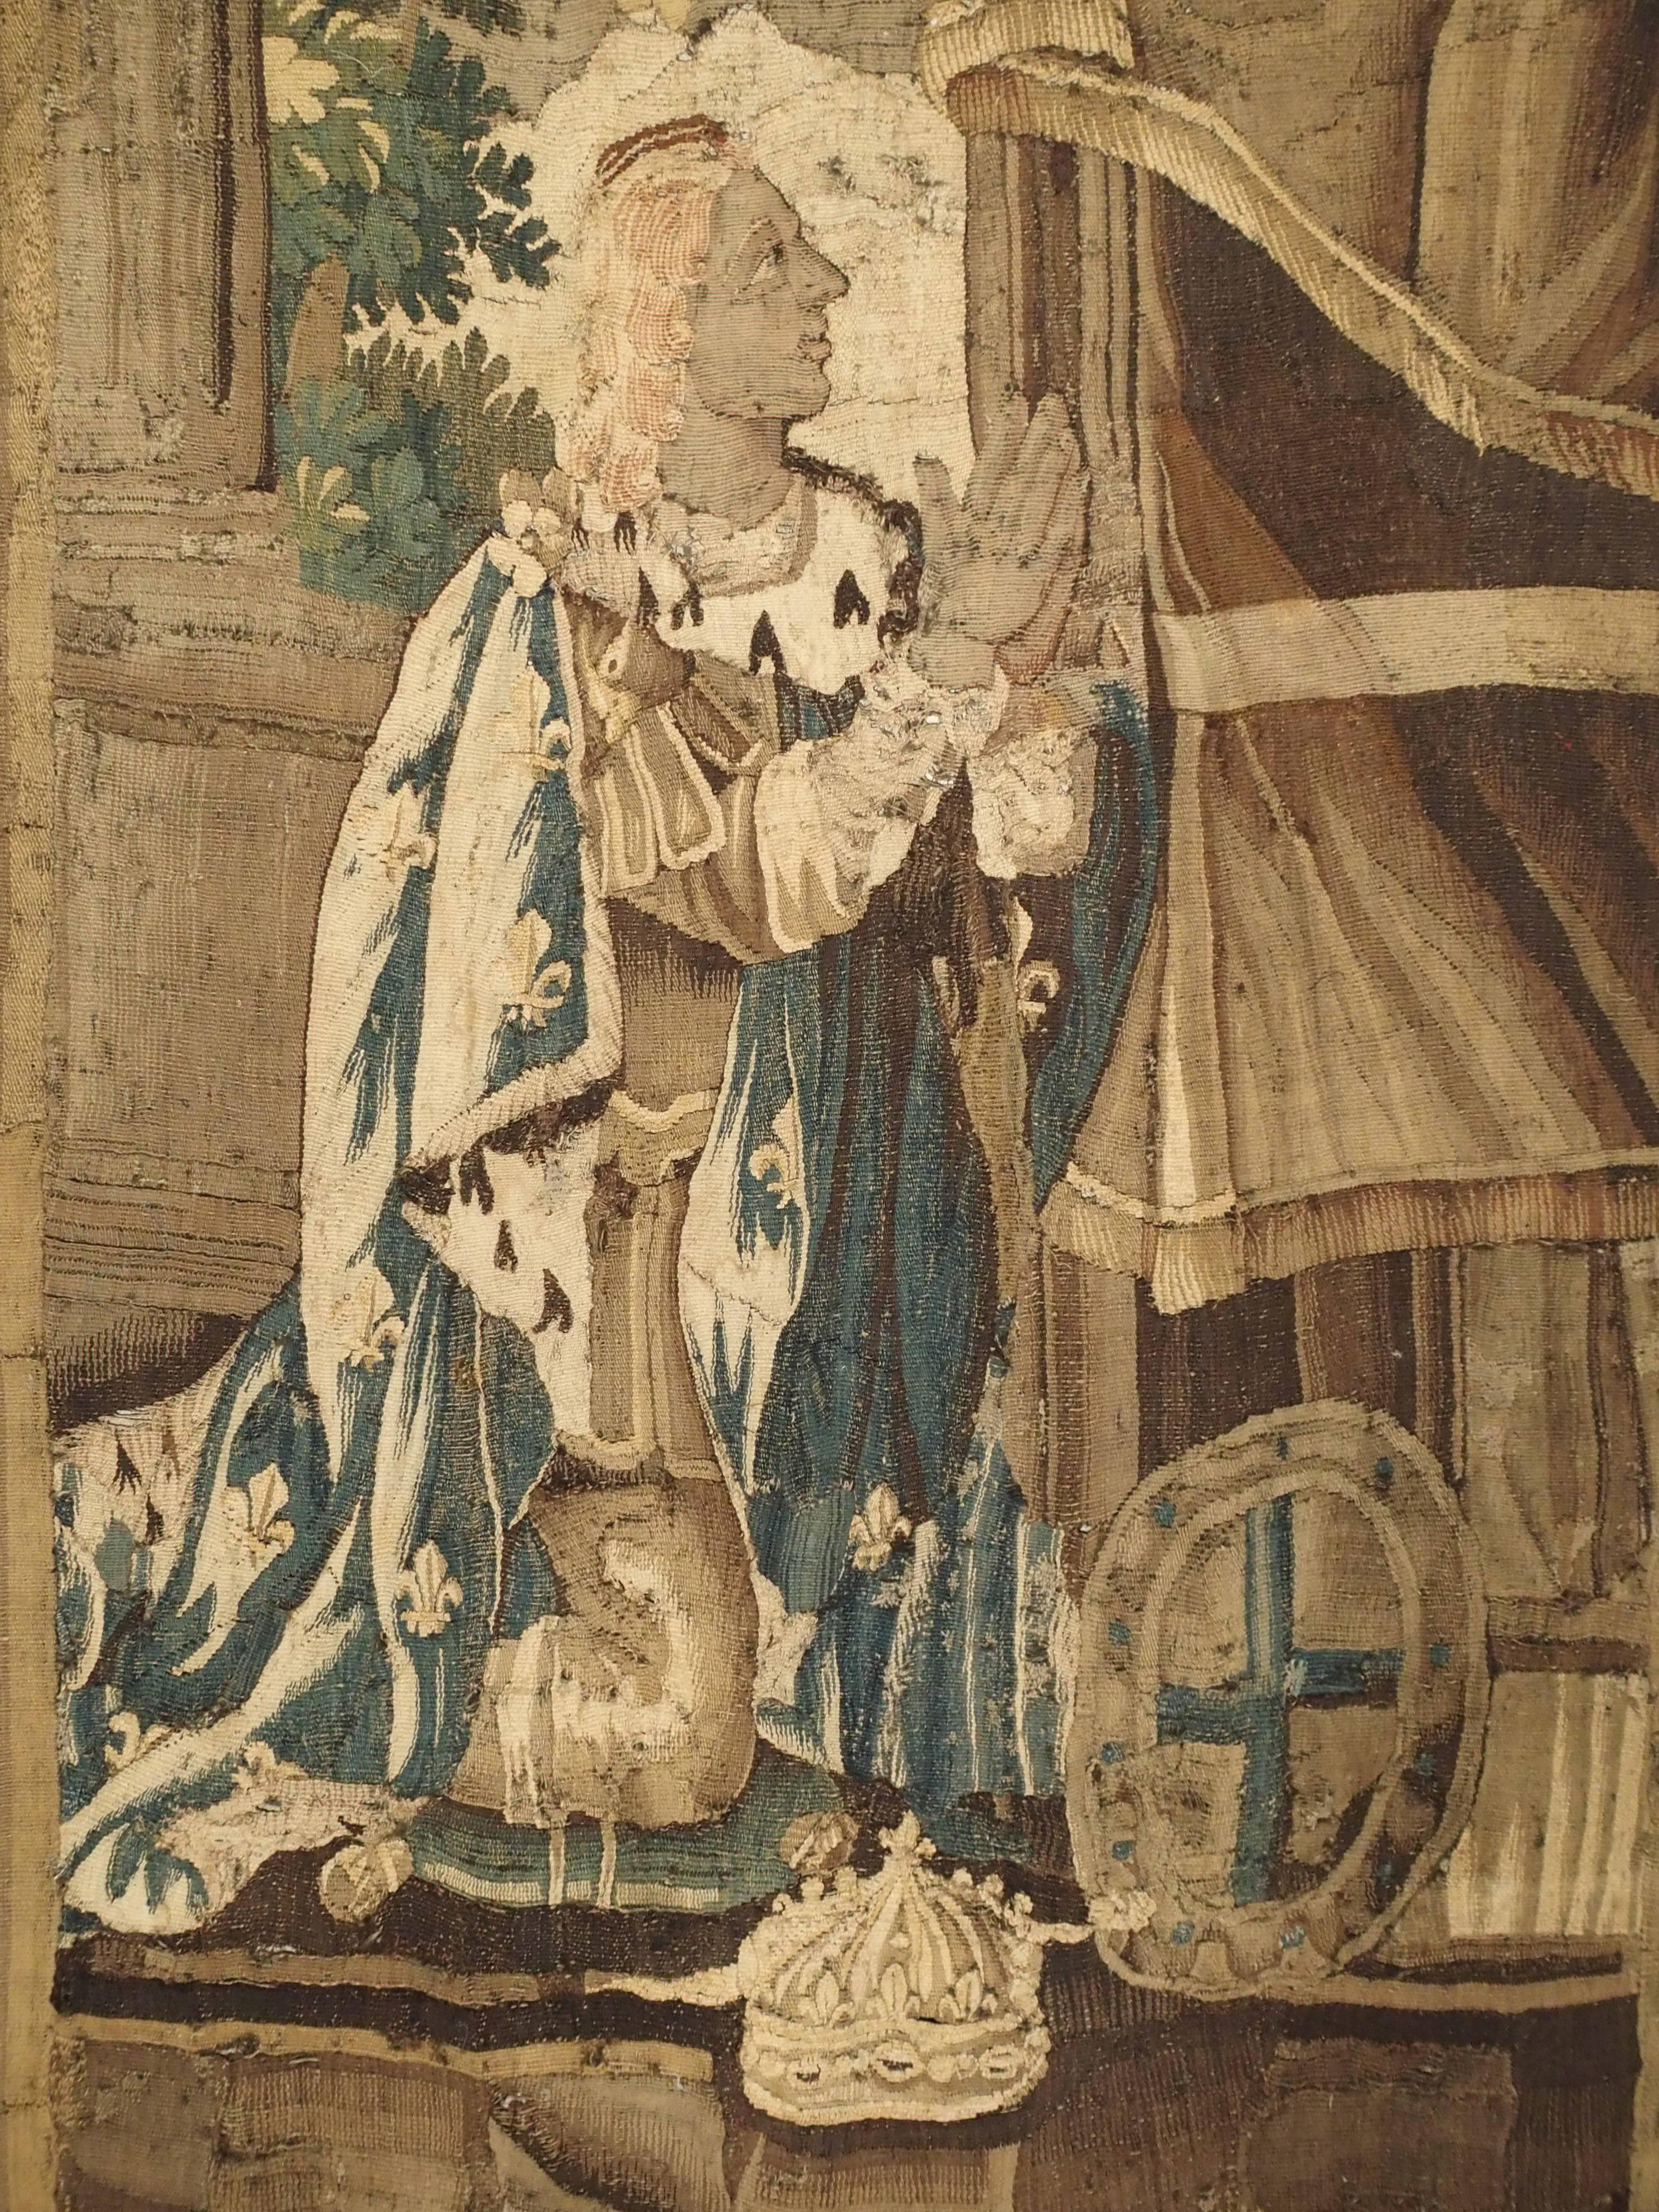 This Aubusson tapestry depicts the coronation a King, kneeling before a section of layered drapery. He is dressed in a Royal robe decorated with the fleur-de-lis motif. His crown is to the right of his knee and it too, has a fleur-de-lis on top of